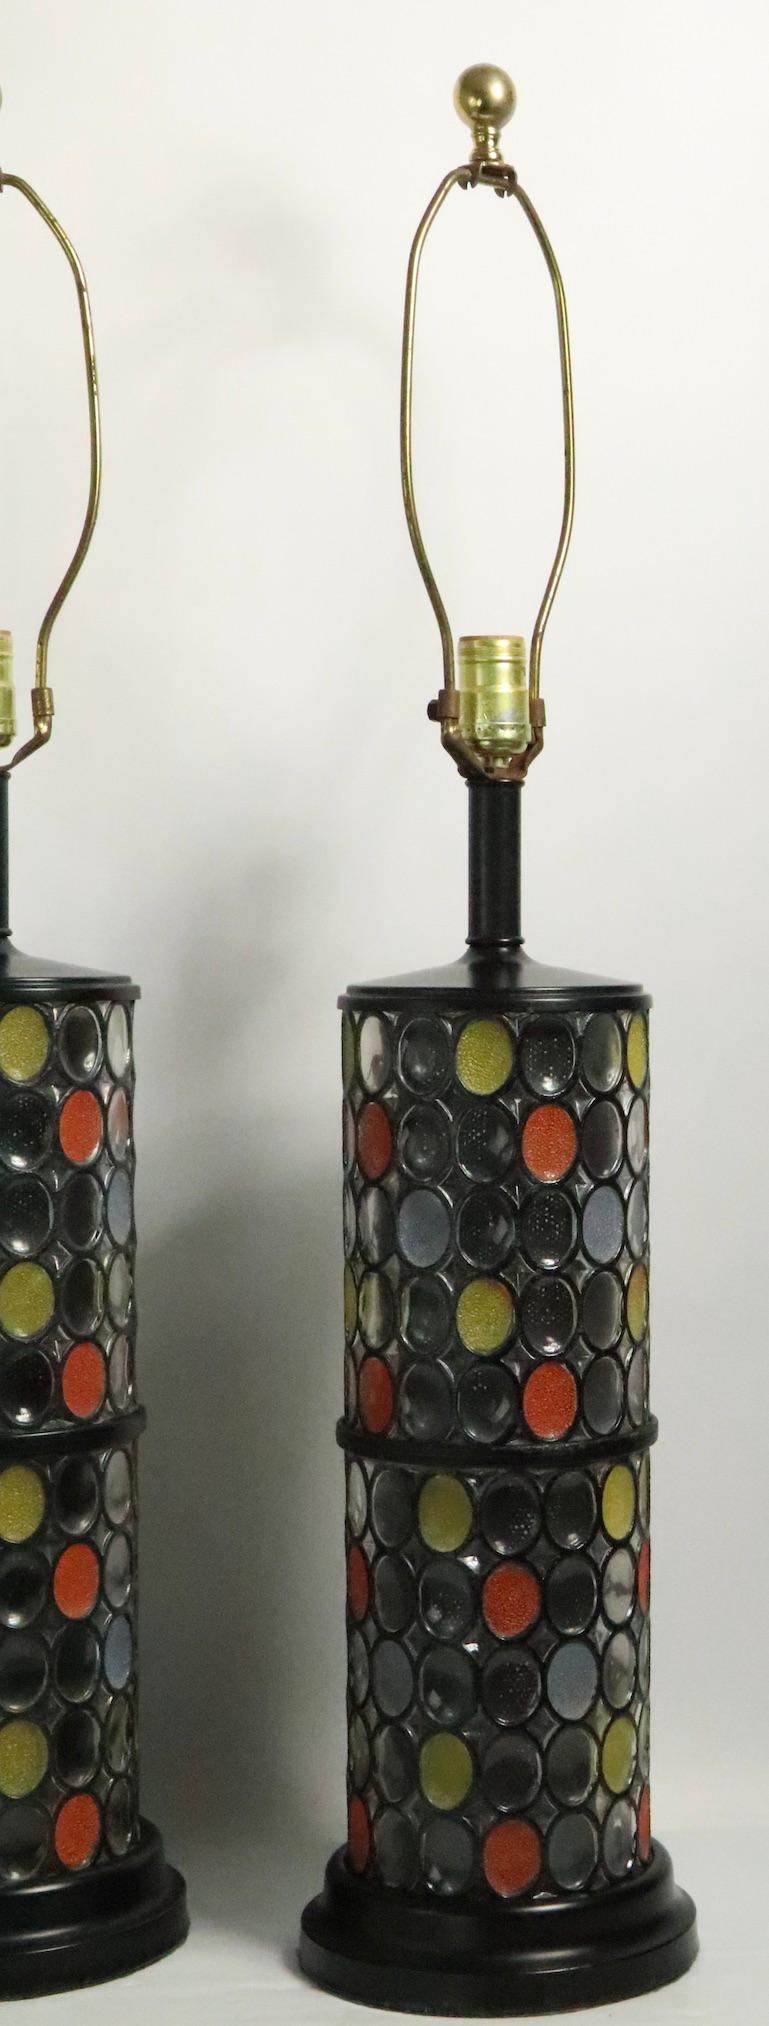 Pair glass table lamps having an oval mosaic style faux leaded surface. The lamps have a perforated cylindrical metal mesh interior, both are in good, clean and working condition. Lamps accept standard size screw in bulbs, shades not